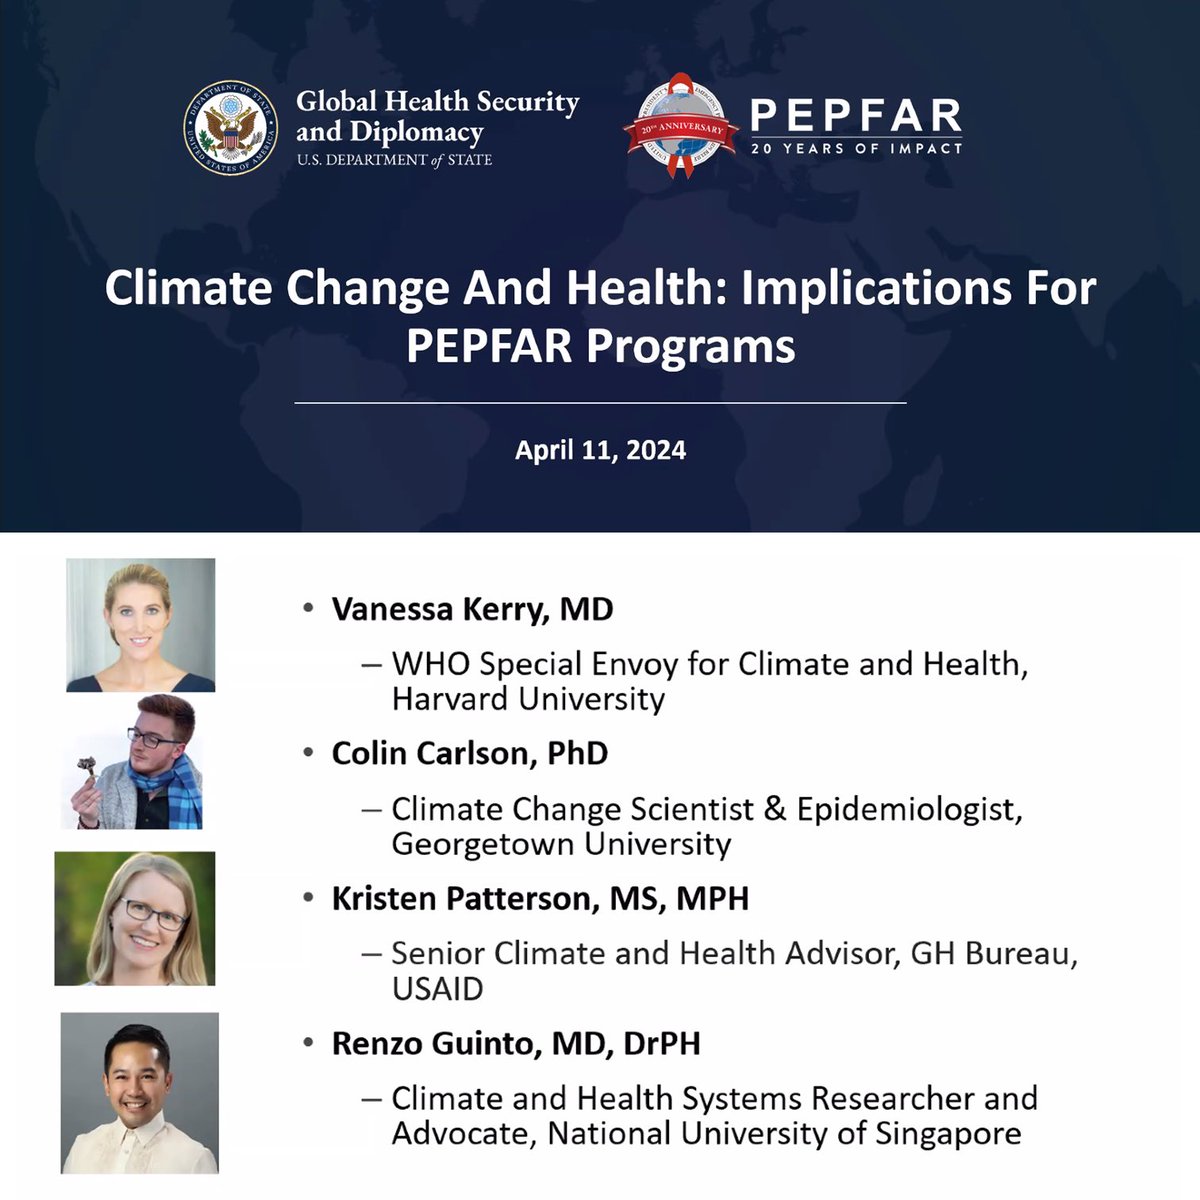 Thanks to @StateDept @USAmbGHSD @PEPFAR 🇺🇸 for inviting me to this important conversation on the nexus of #HIVAIDS & #ClimateChange

Thrilled to exchange ideas & solutions for #PlanetaryHealth 🌏 with @VBKerry (@WHO #ClimateHealth envoy) @ColinJCarlson Kristen Patterson @USAID